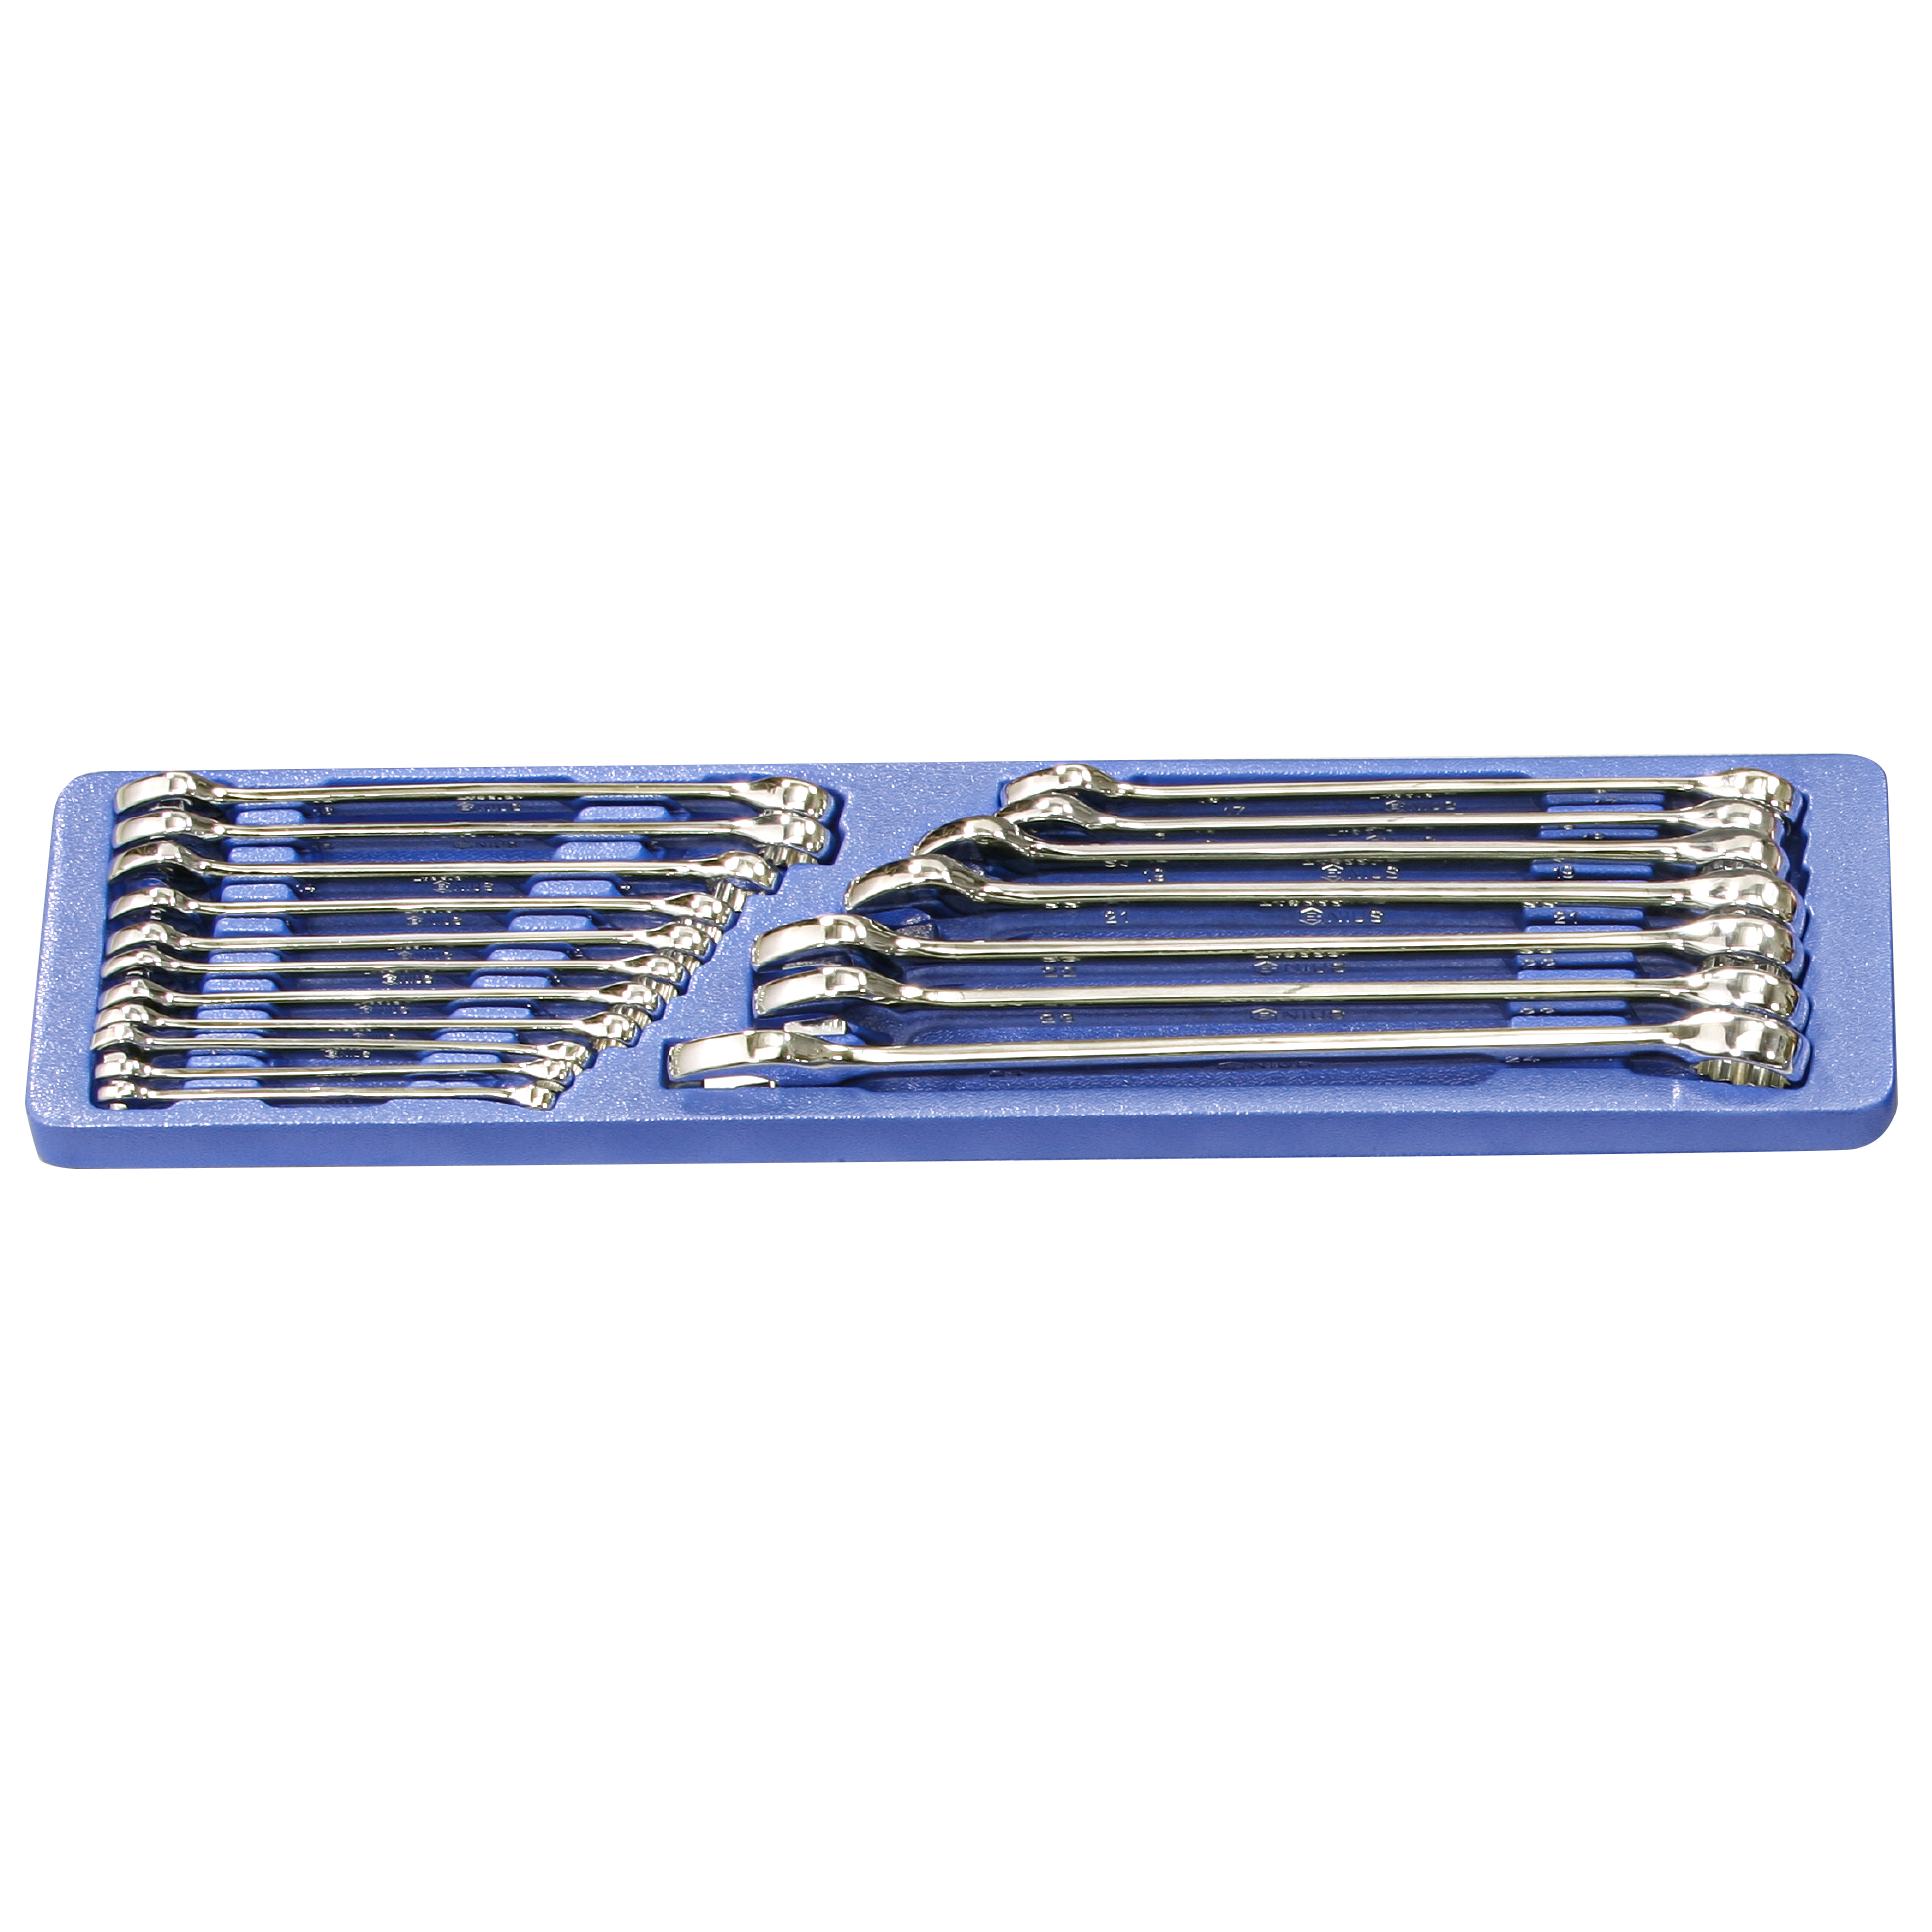 18PC Metric Combination Wrench Set(MS-190TS)